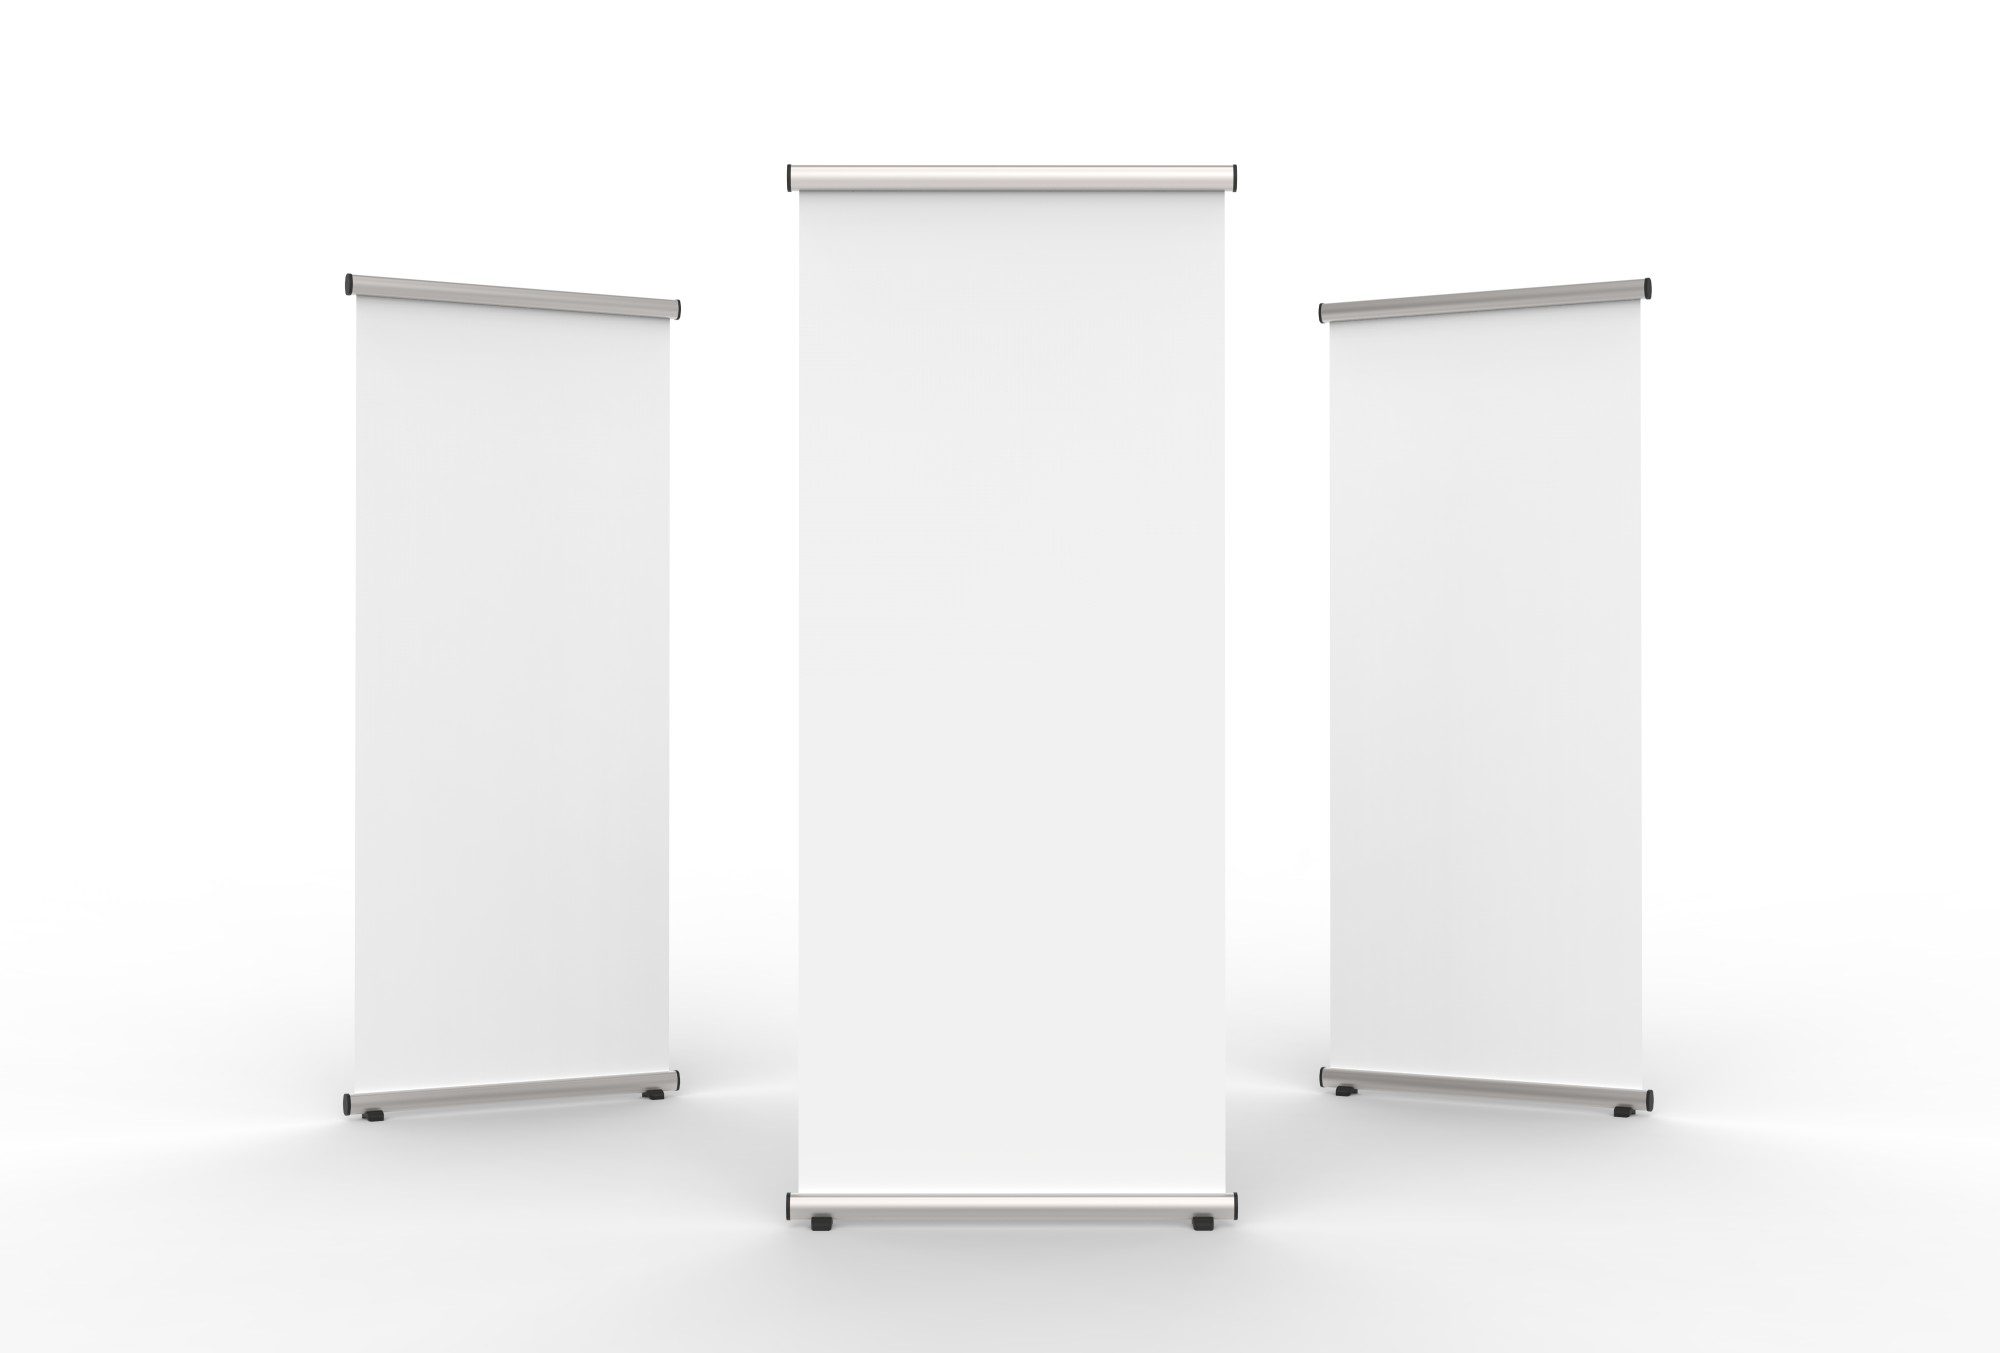 Blank roll up banner 3 display view template 3d illustrating